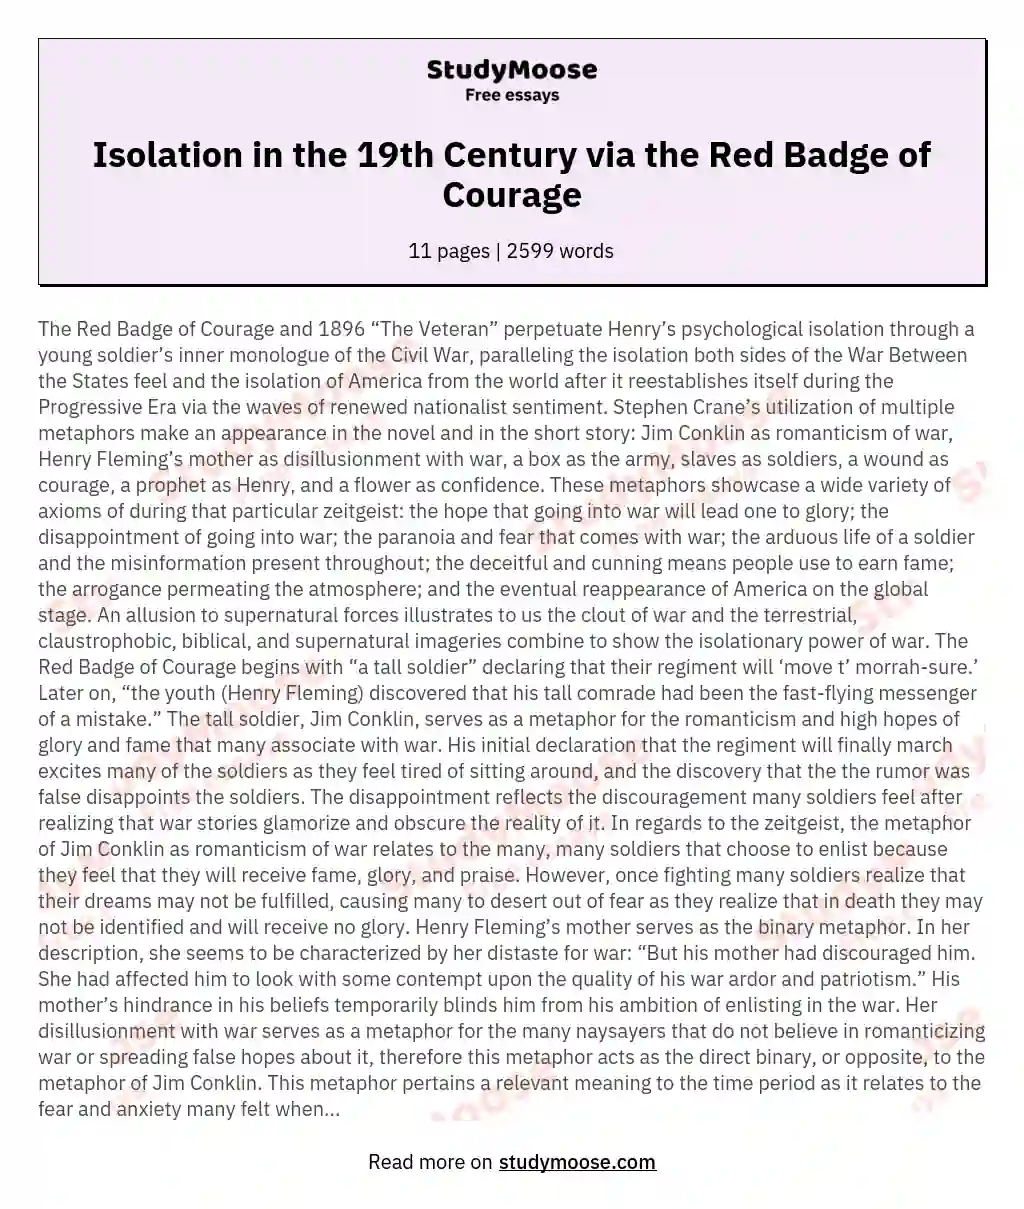 Isolation in the 19th Century via the Red Badge of Courage essay